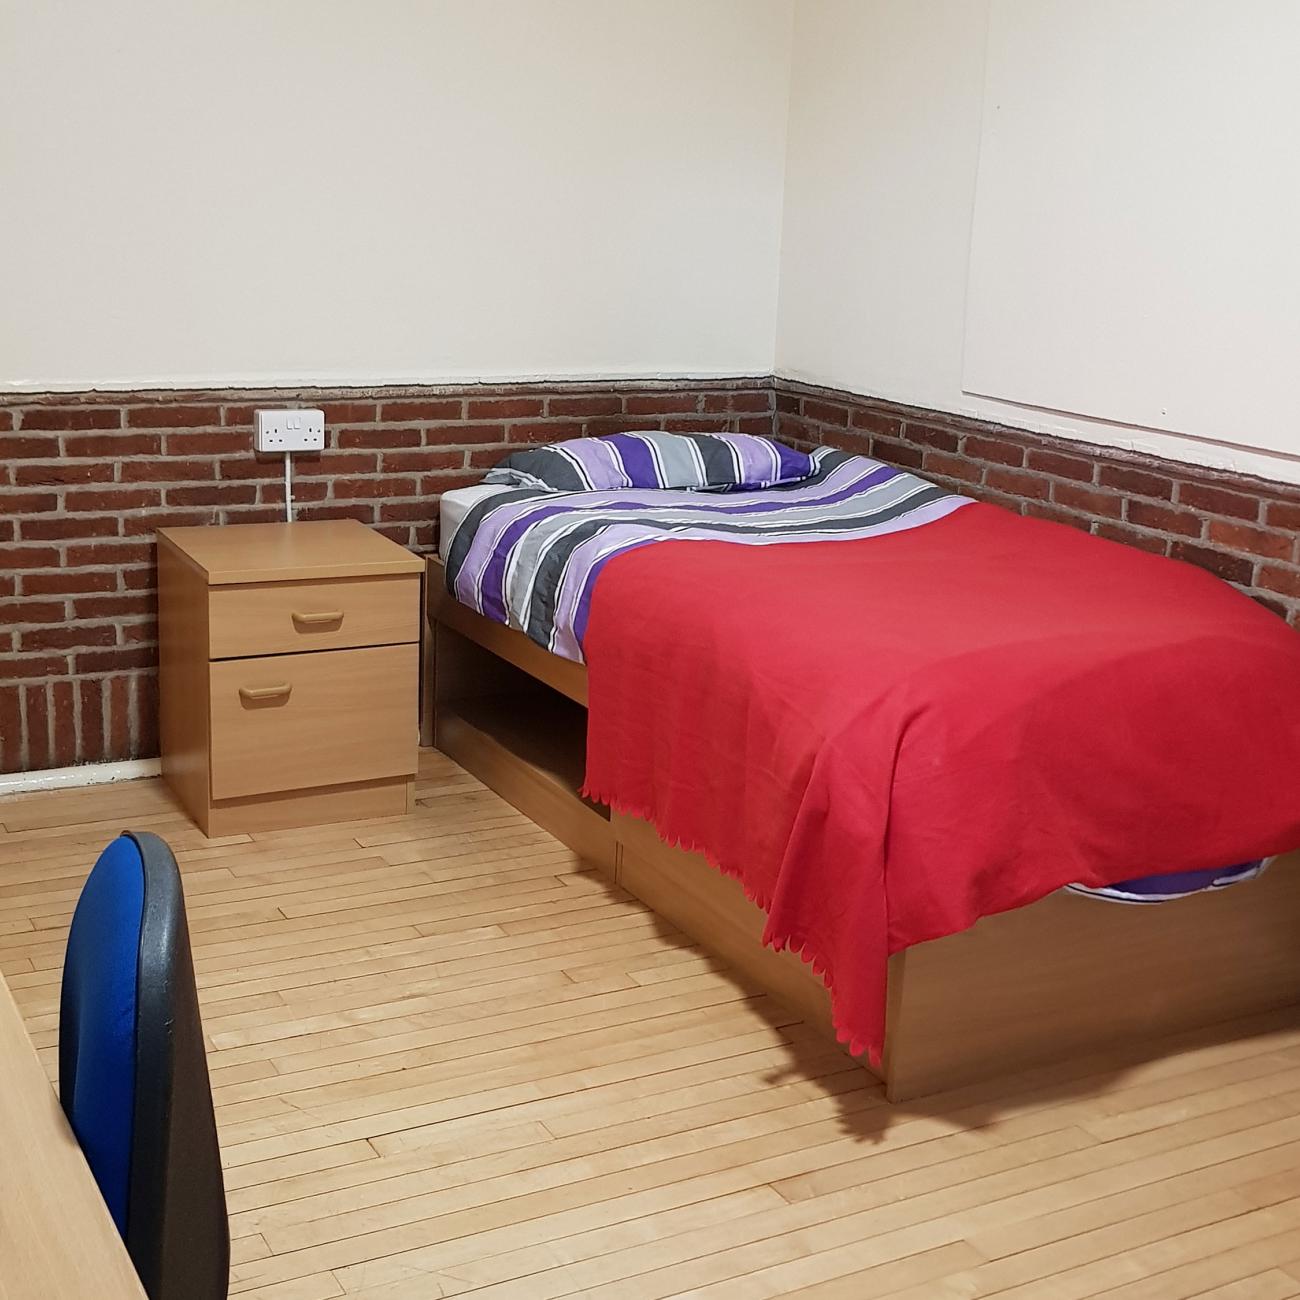 A single bed with red sheets in an empty student bedroom with wooden flooring.